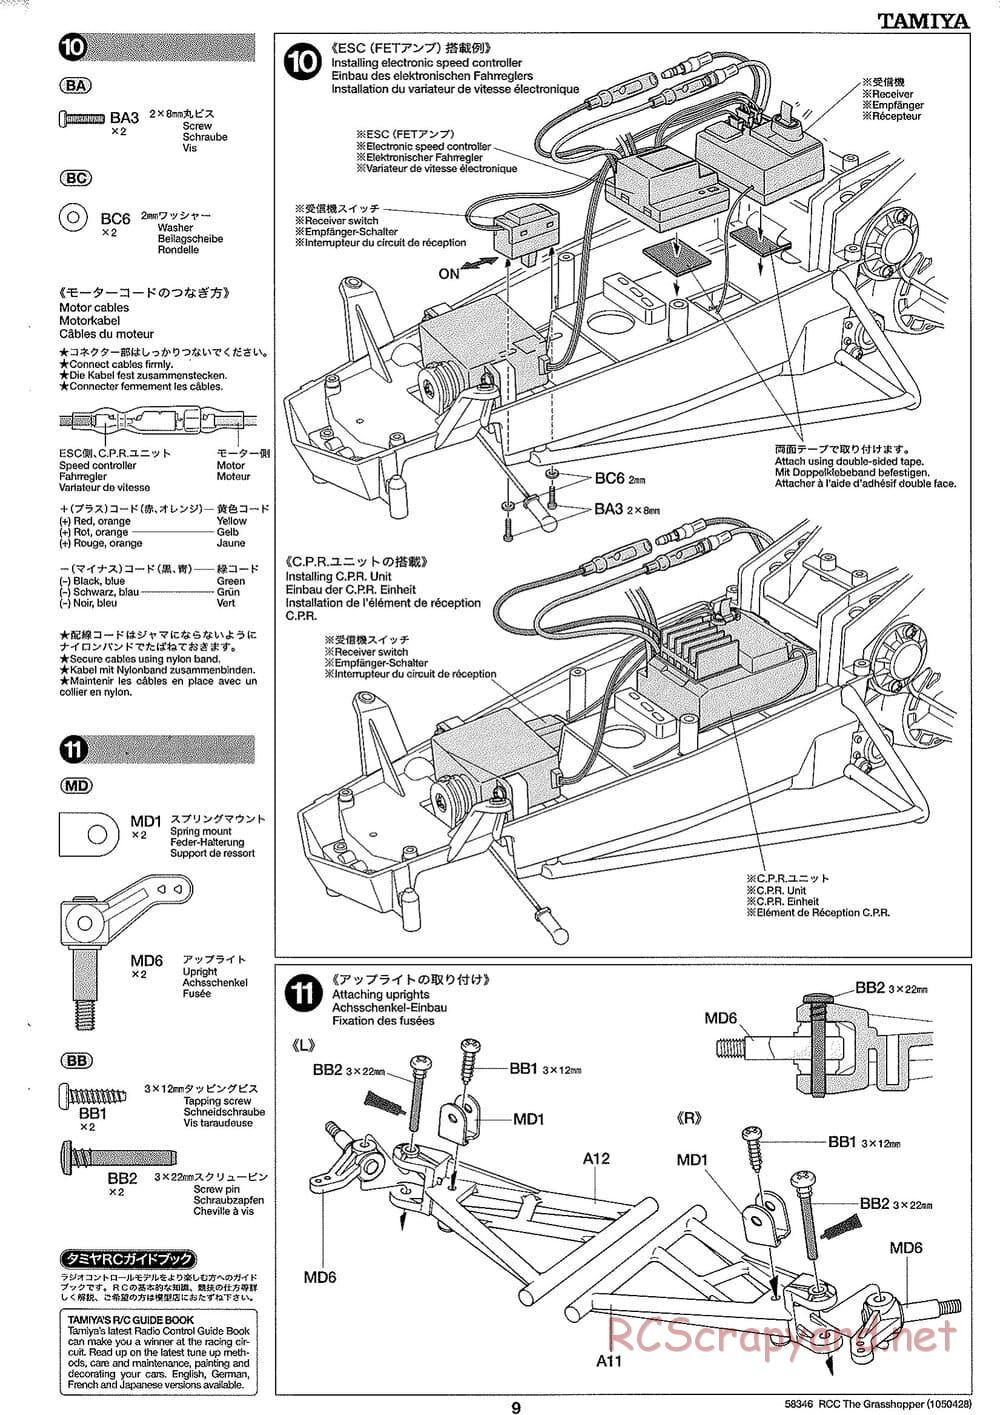 Tamiya - The Grasshopper (2005) - GH Chassis - Manual - Page 9